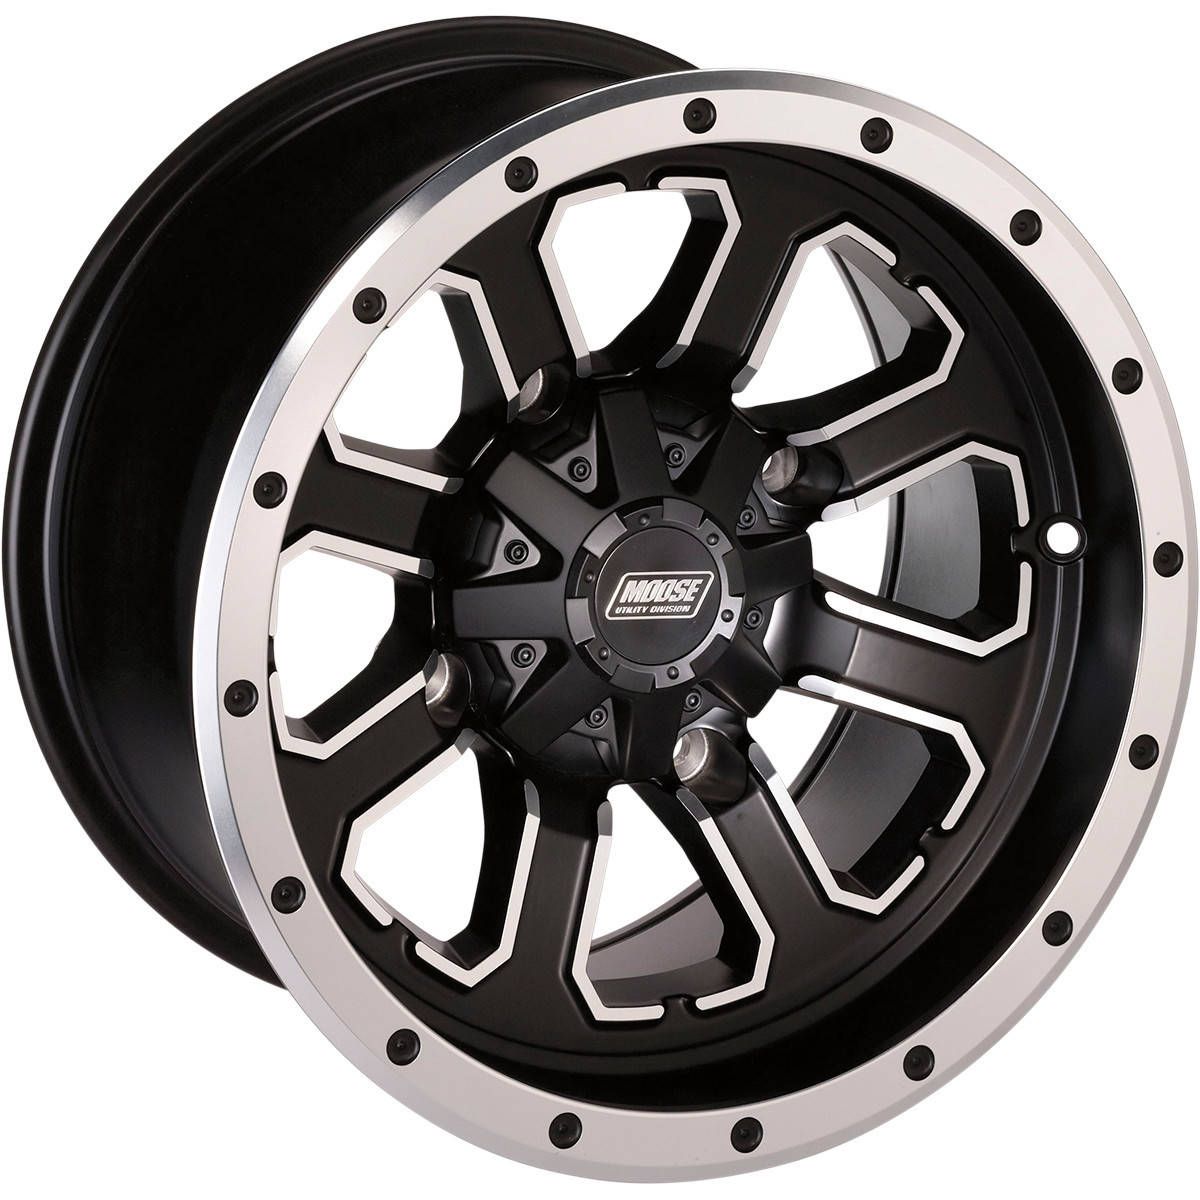 Moose Racing 547X Wheels SIZE 14X7 4/115 4+3 Silver Front 0230-0903 